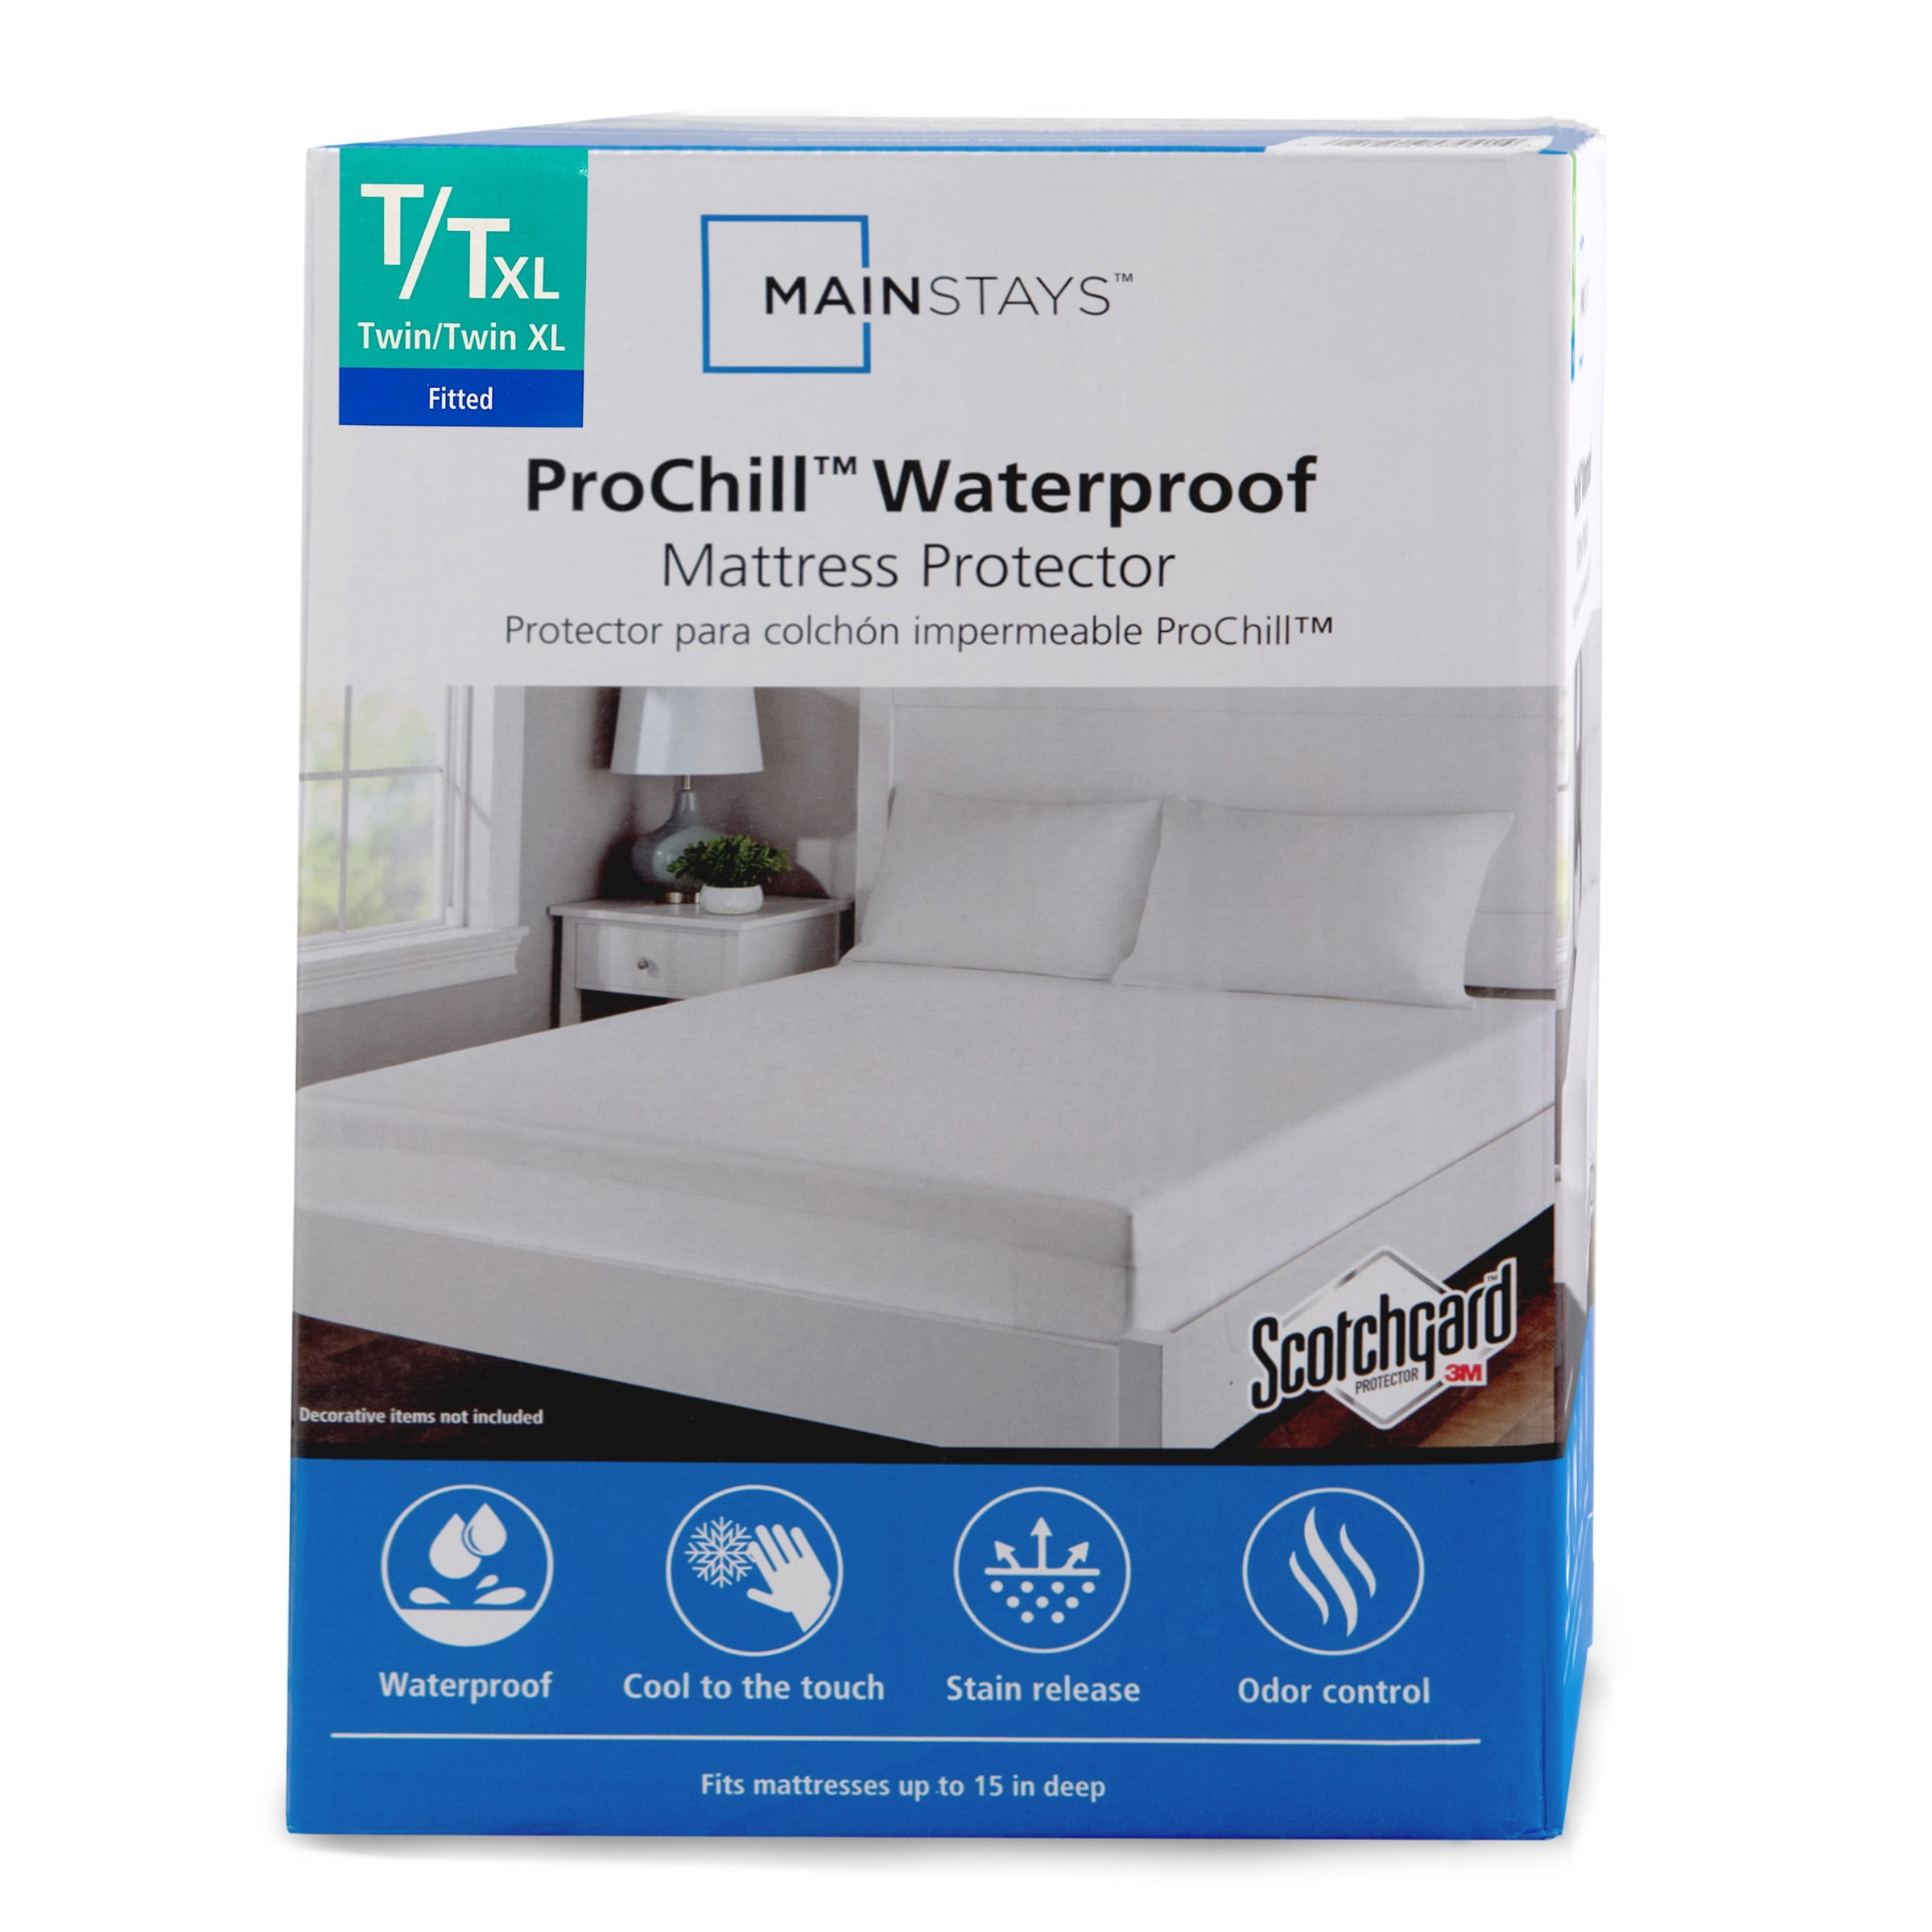 Heavy Duty Waterproof Mattress Pad Protector Cover Sheets Fitted up to 18" Deep 